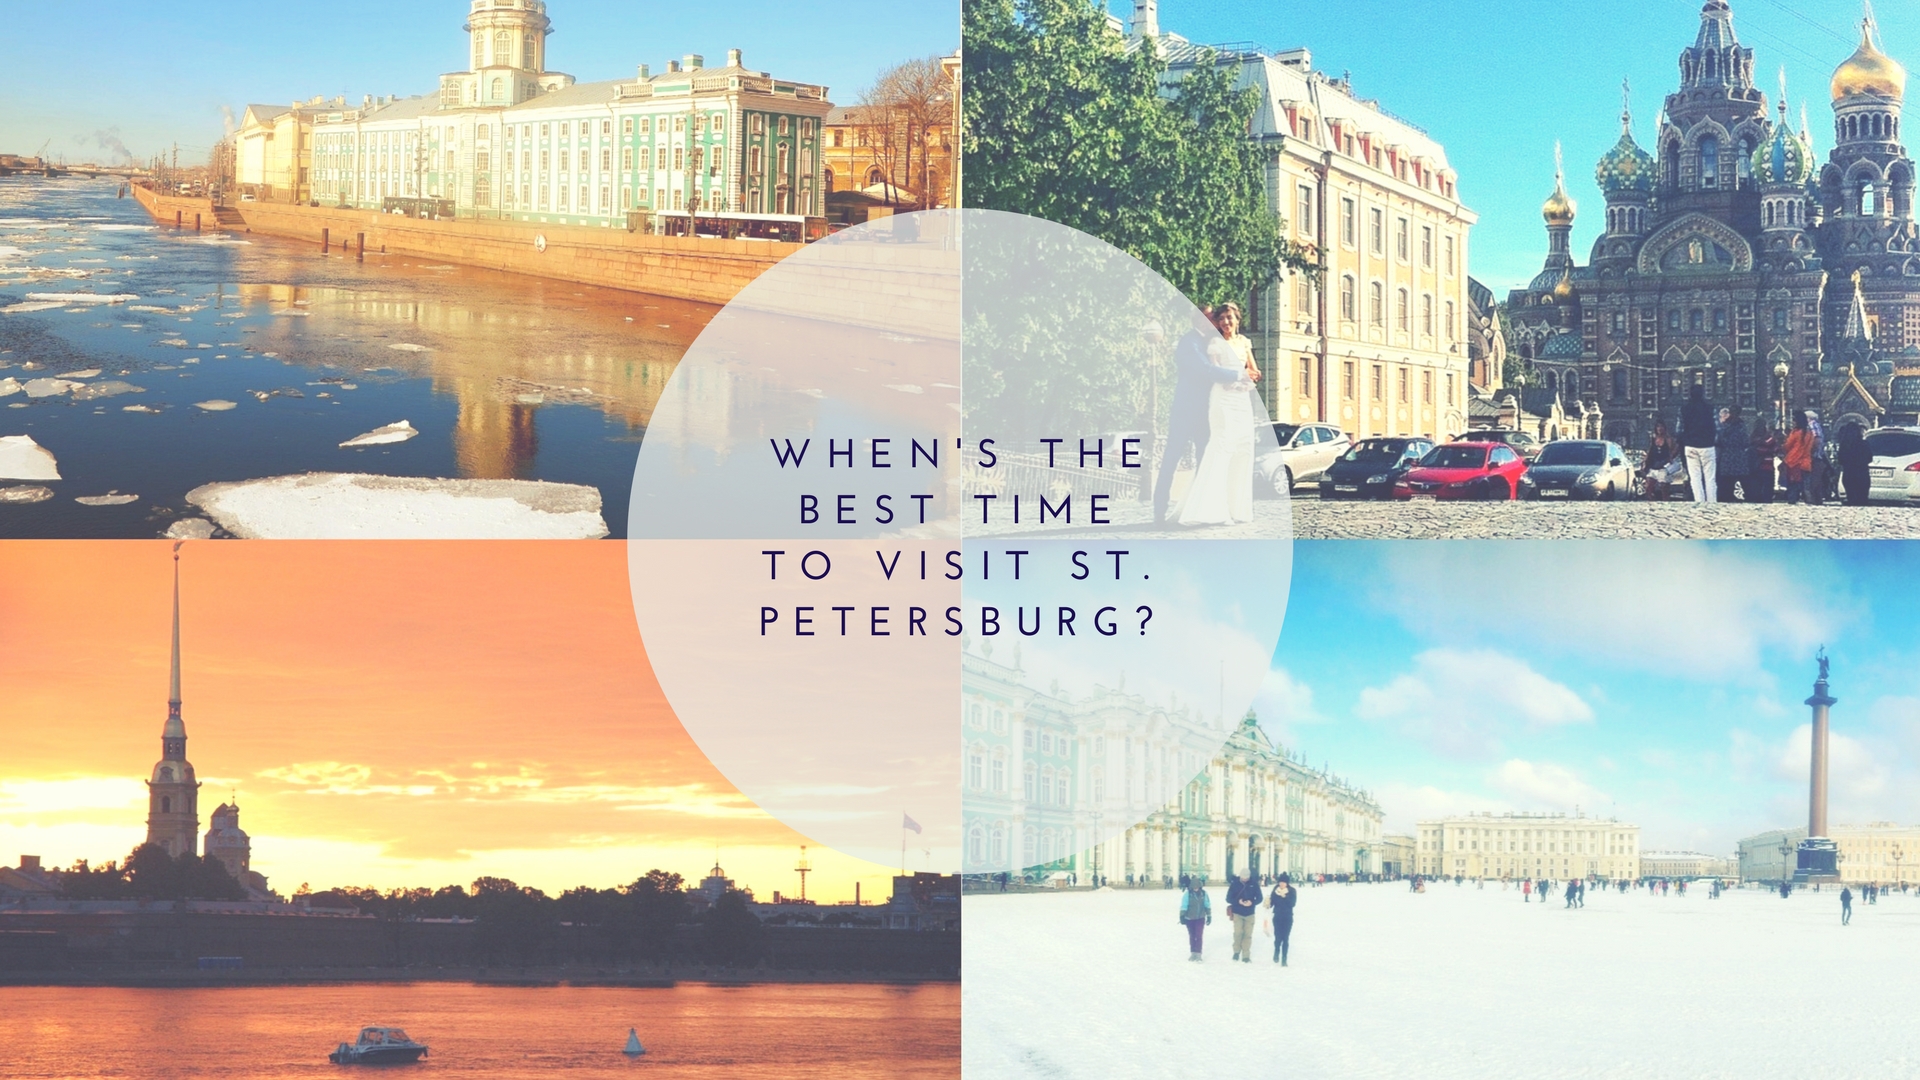 When’s the Best Time to Visit St. Petersburg?